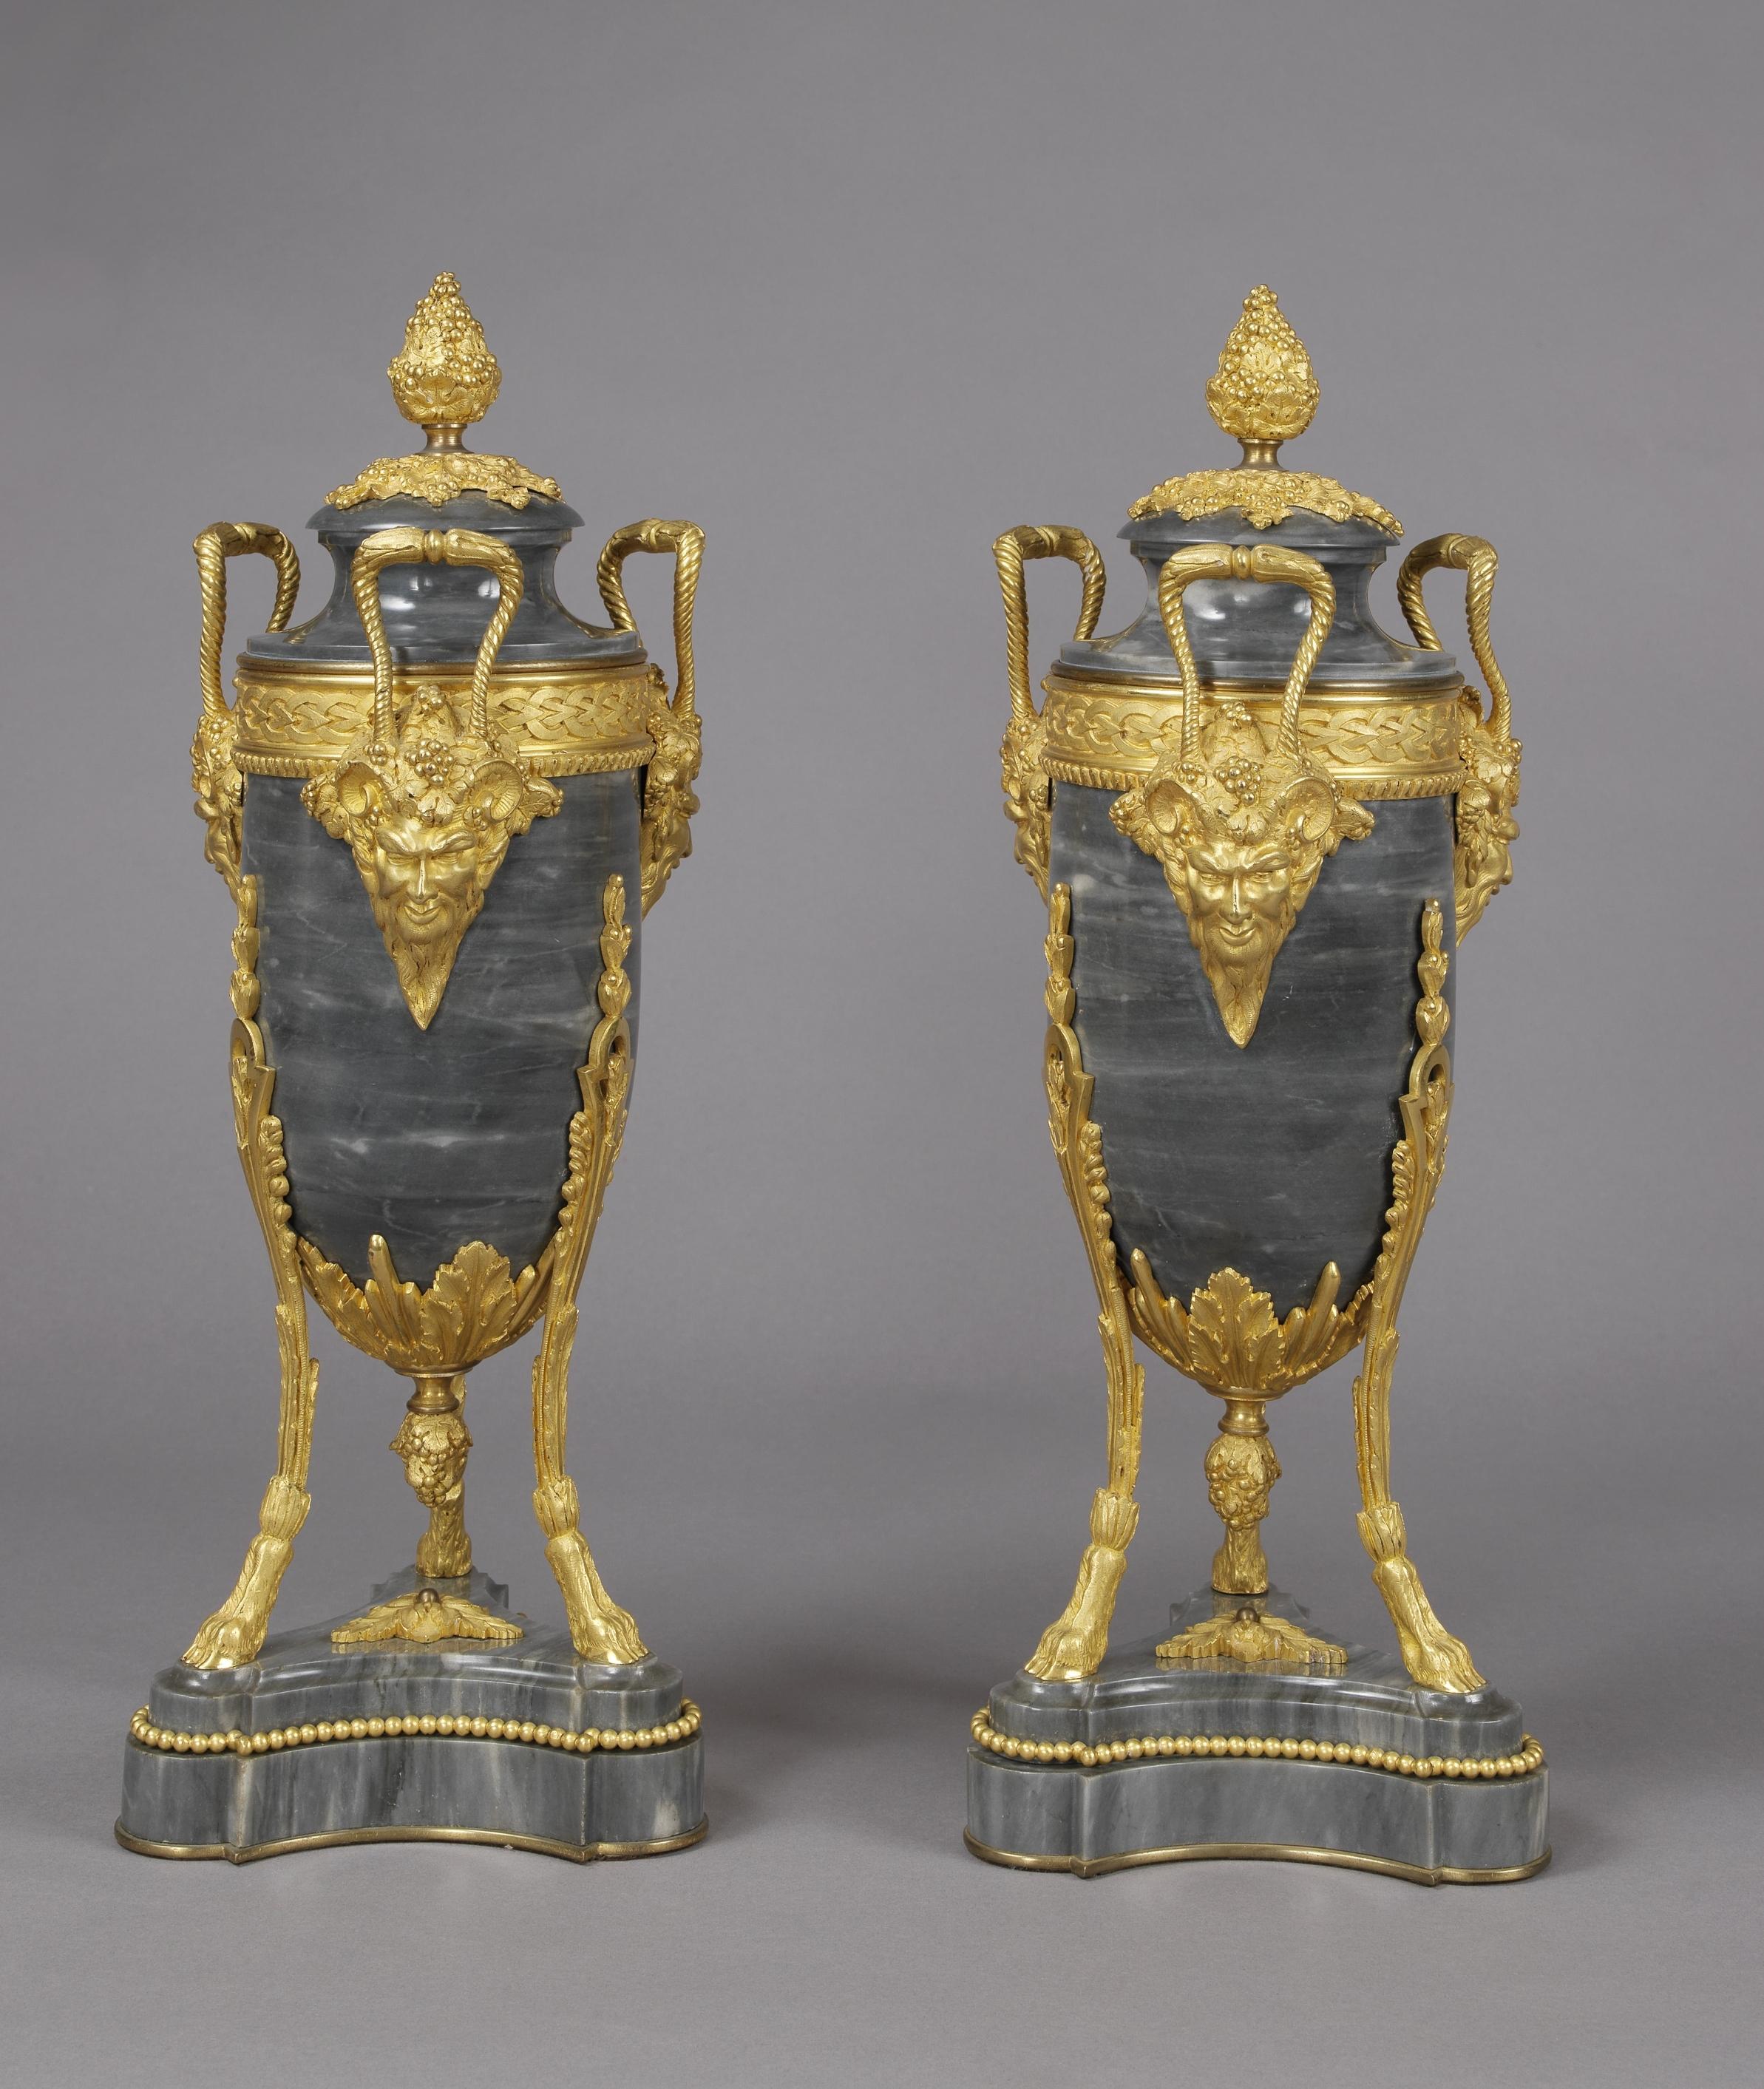 A fine pair of Louis XVI style gilt bronze-mounted Bleu Turquin marble urns with Satyr masks, attributed to Maxime Secrétant. 

French, circa 1890. 

The bronze mounts stamped with inter-linked monogram 'SM, 818', one with 'JJ'.

Maxime